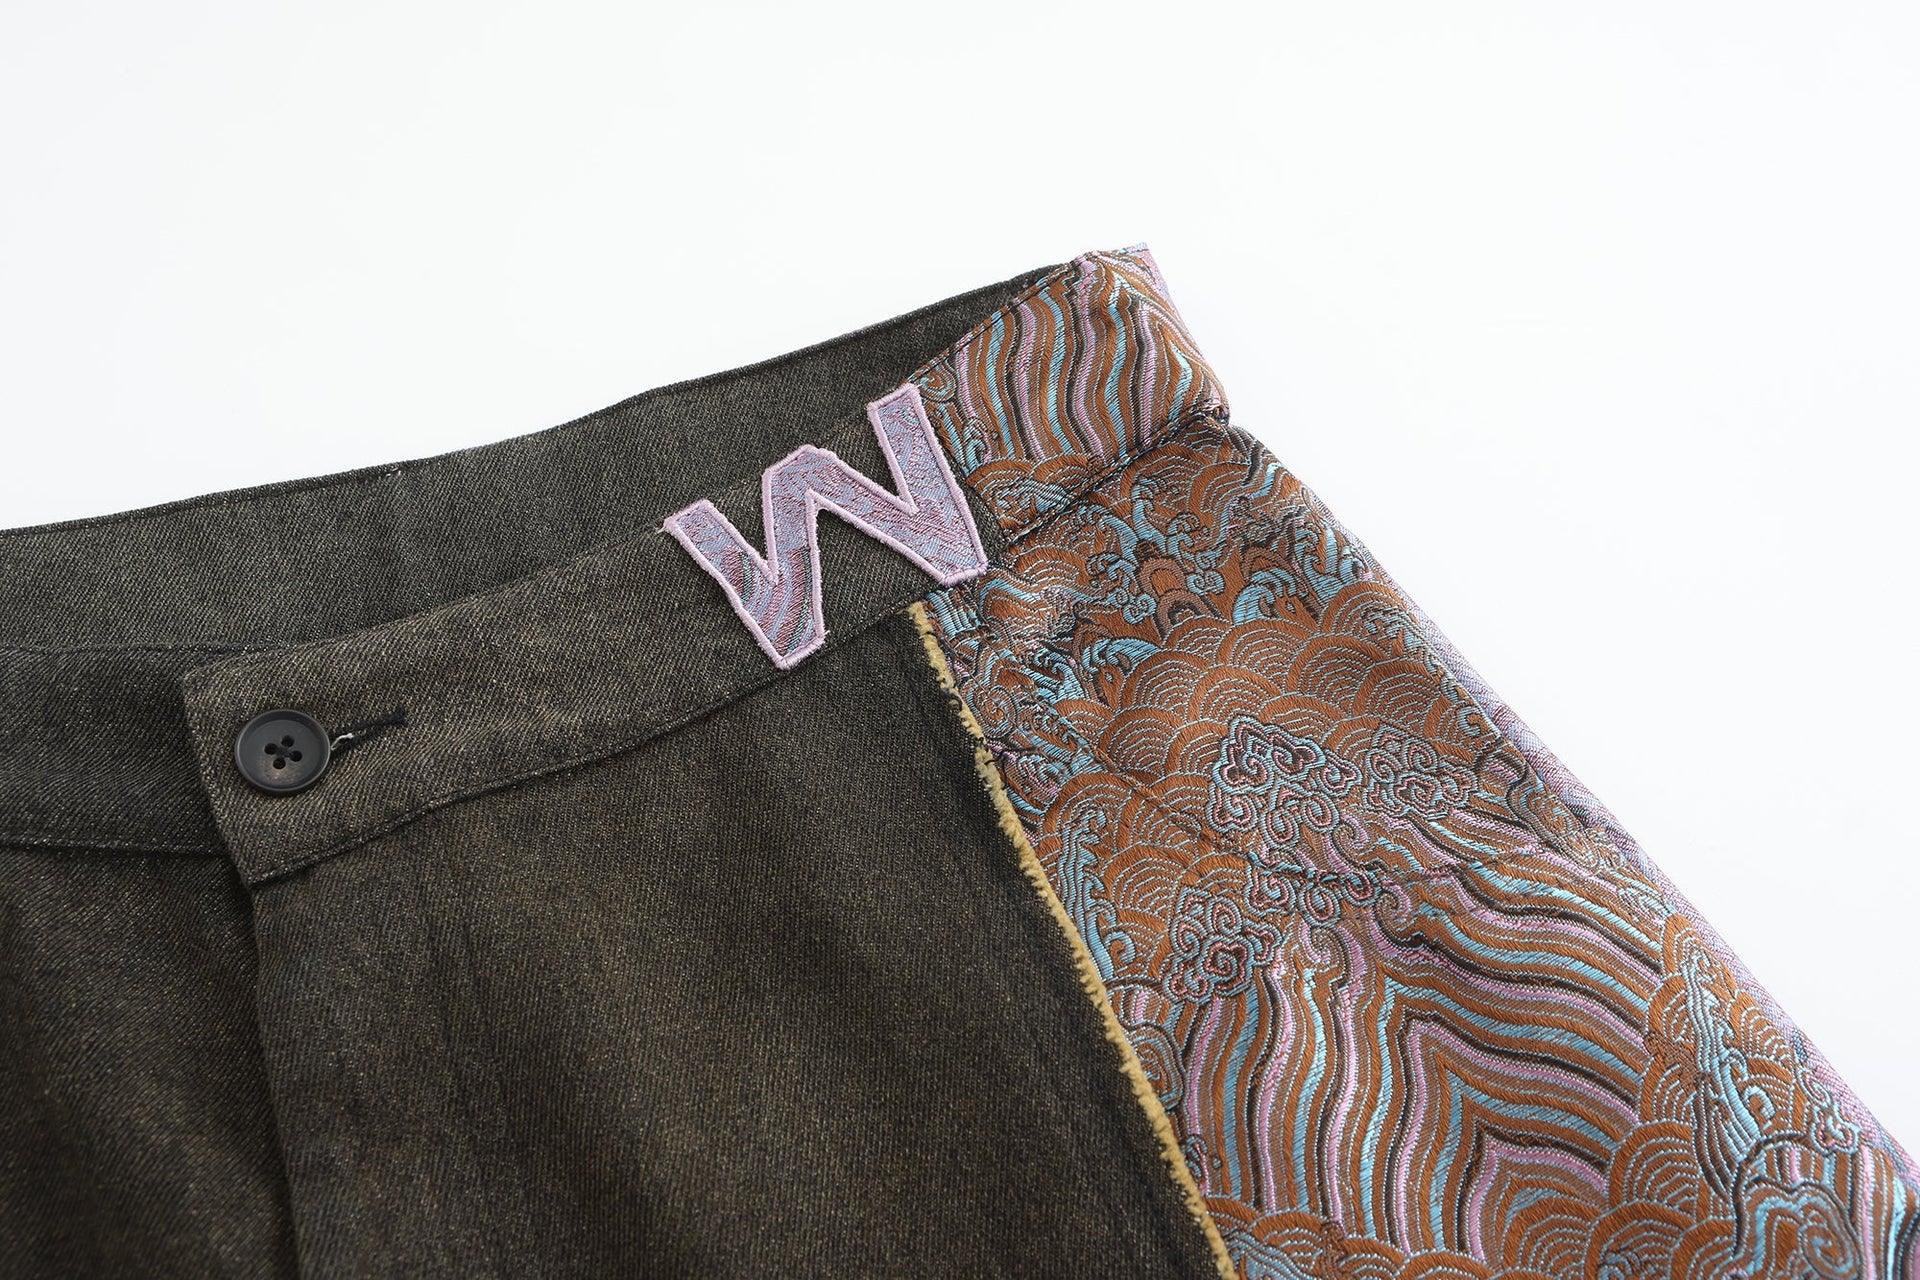 Mid/Low Waist Fit, DA W- Brocade Embroidered Patch Belt Loops, Denim Brocade Patch, up-cycled, renewal, Bleach Dye/Painting, left-side close up